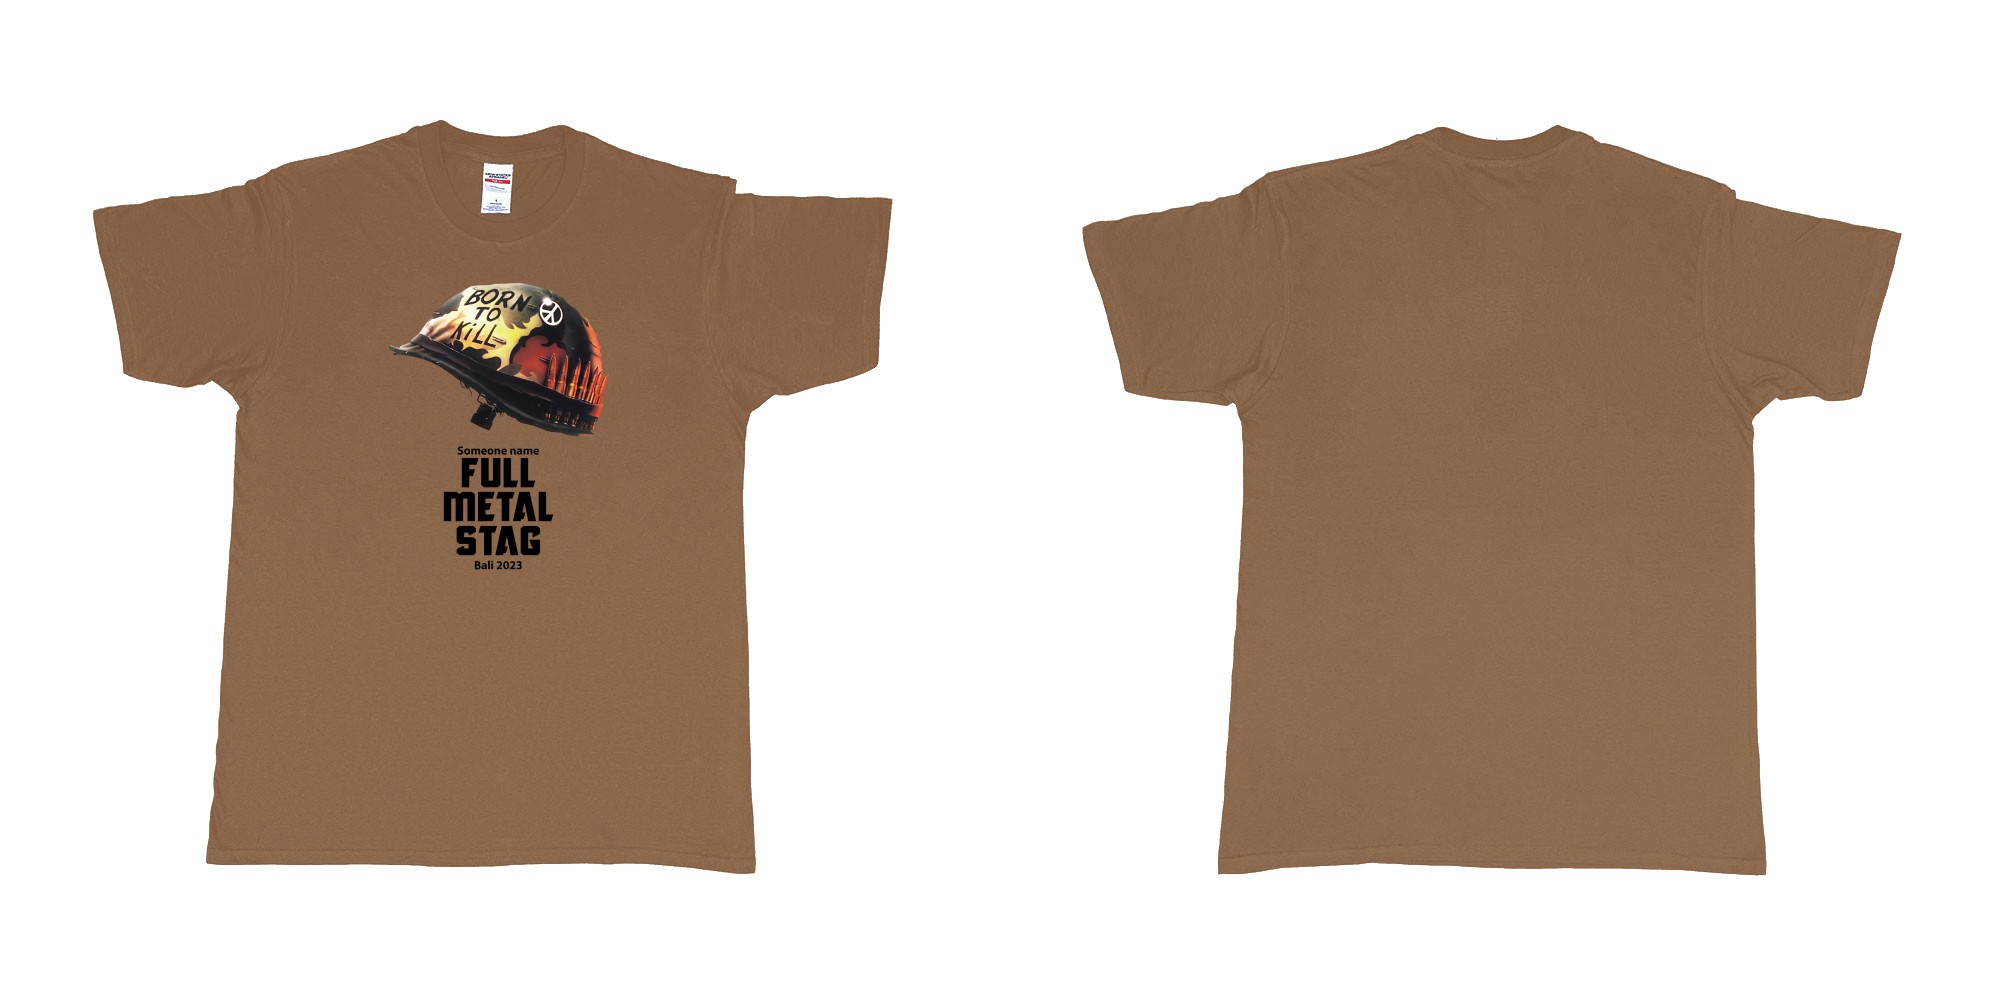 Custom tshirt design Full Metal Jacket Stag in fabric color chestnut choice your own text made in Bali by The Pirate Way